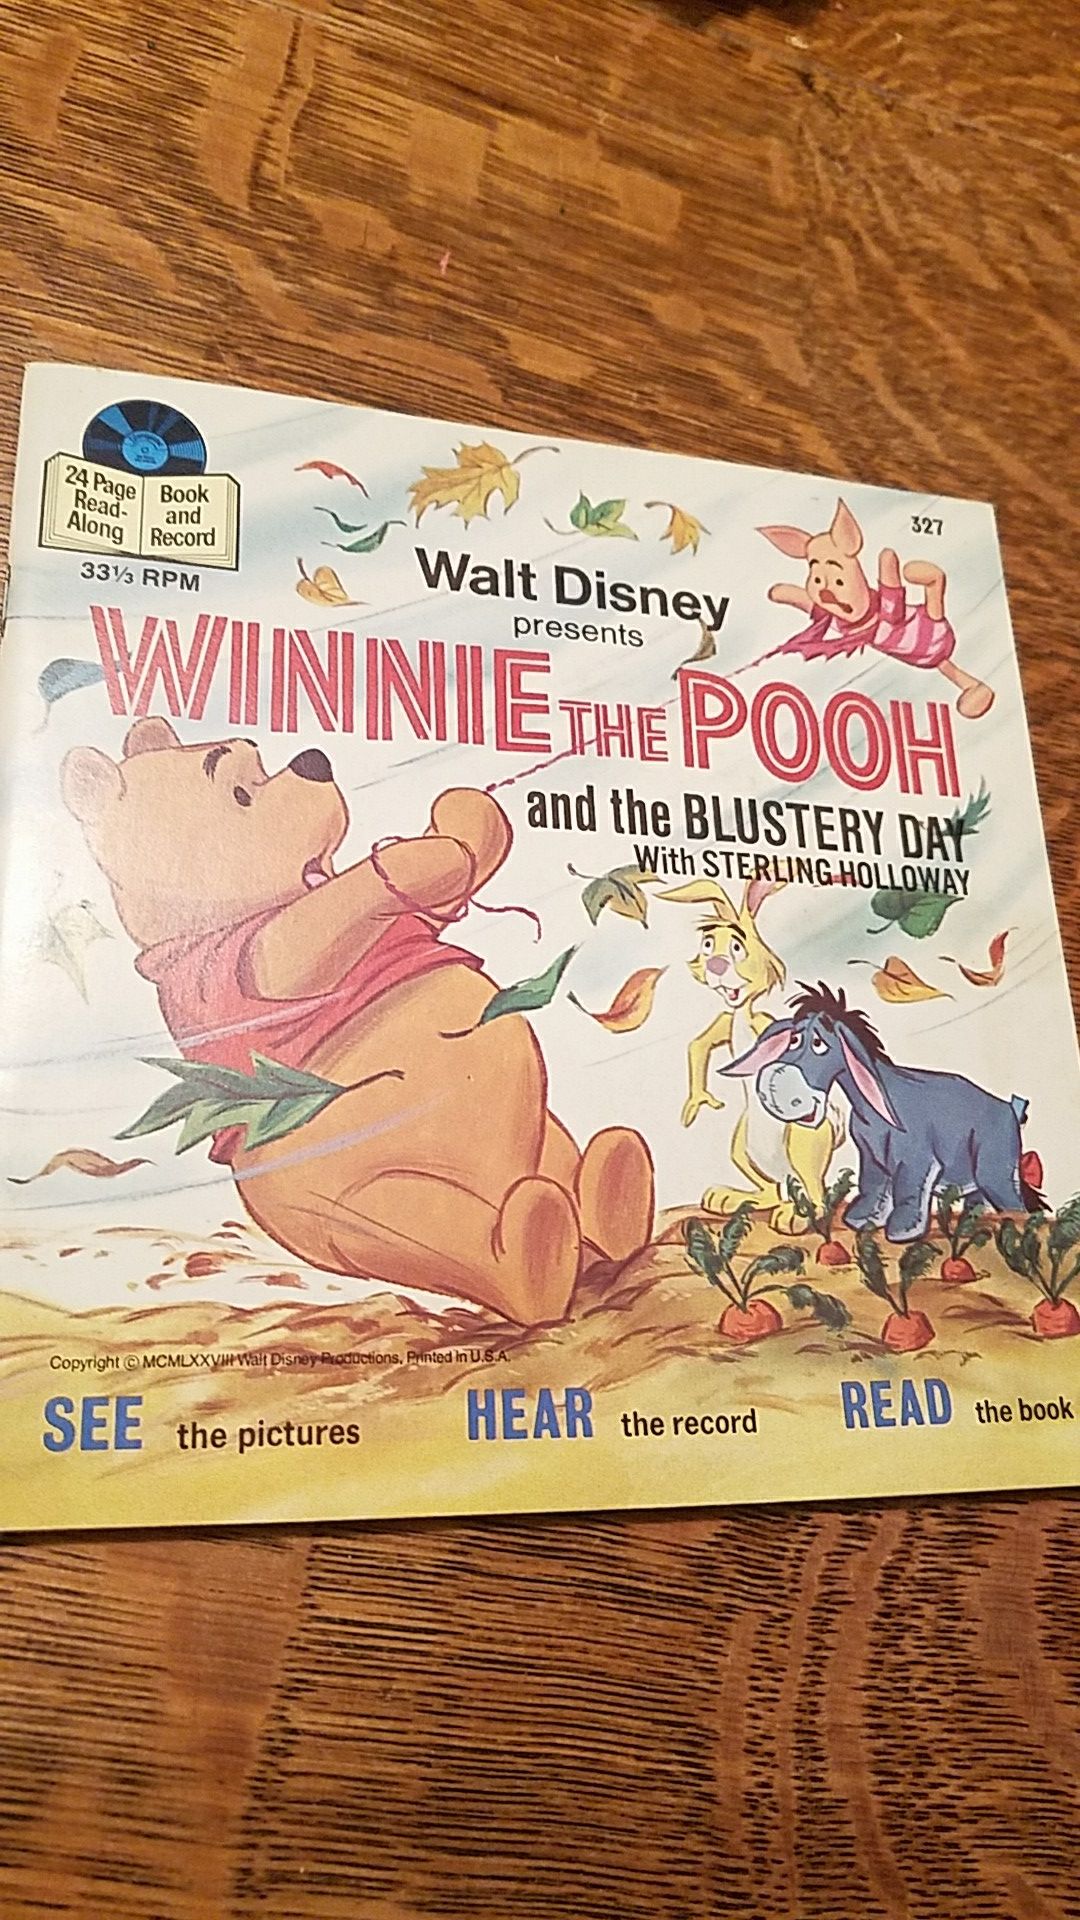 DISNEY'S WINNIE THE POOH AND THE BLUSTERY DAY READ ALONG BOOK AND RECORD 1969 Disney 327